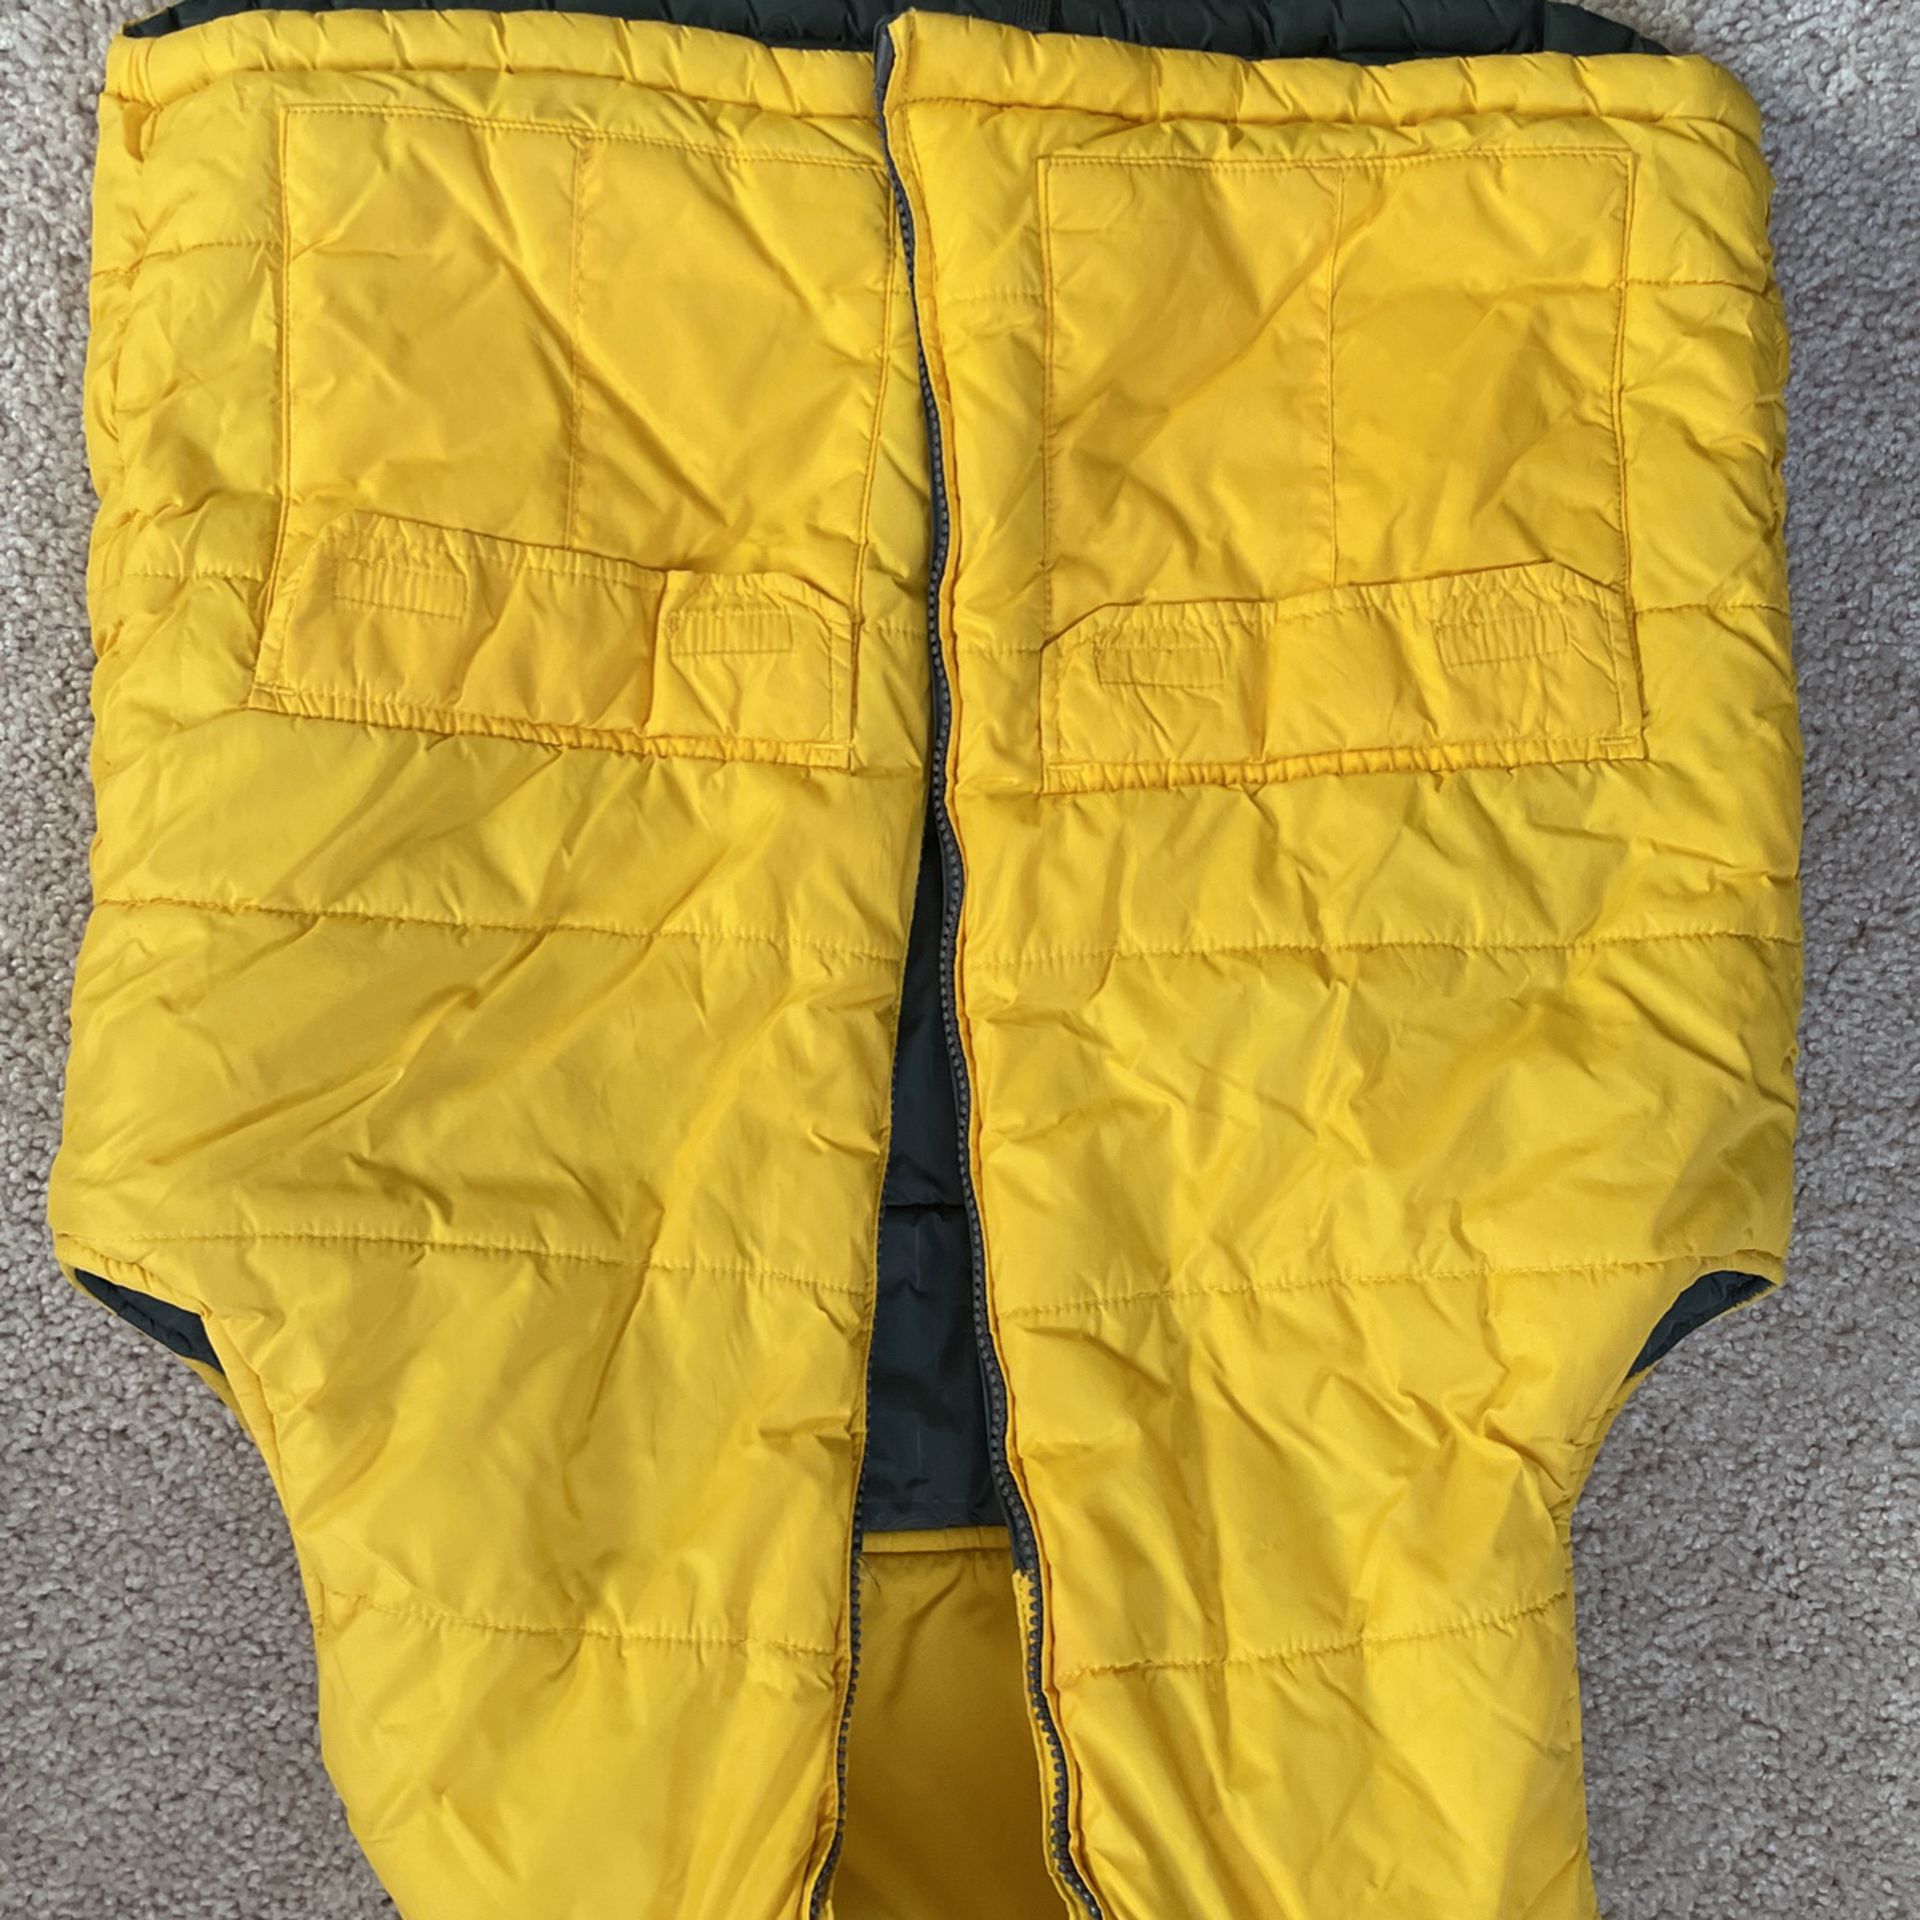 Old Navy Reversible Puffer Vest Size 12/14